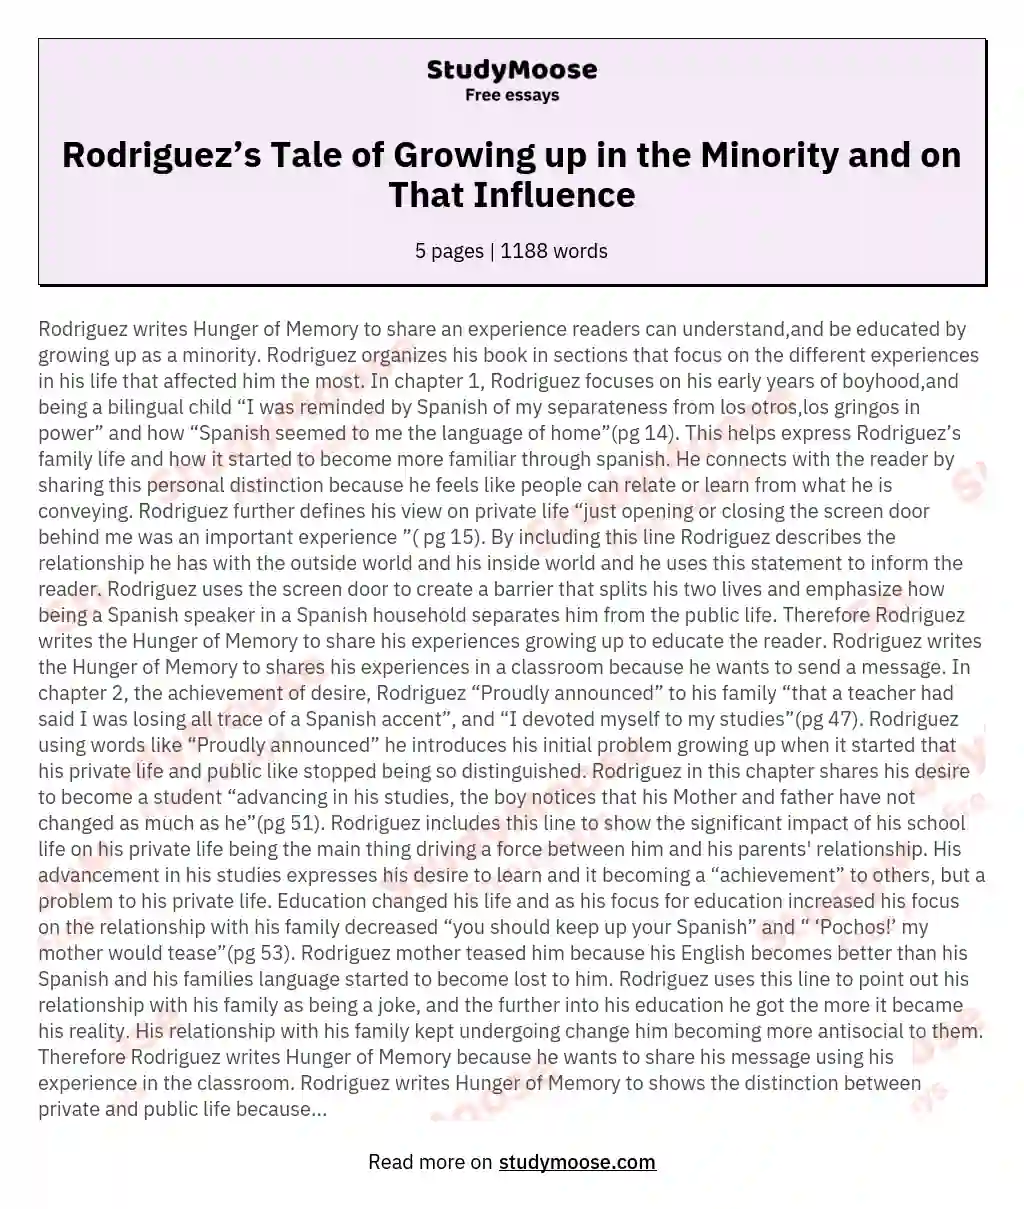 Rodriguez’s Tale of Growing up in the Minority and on That Influence essay